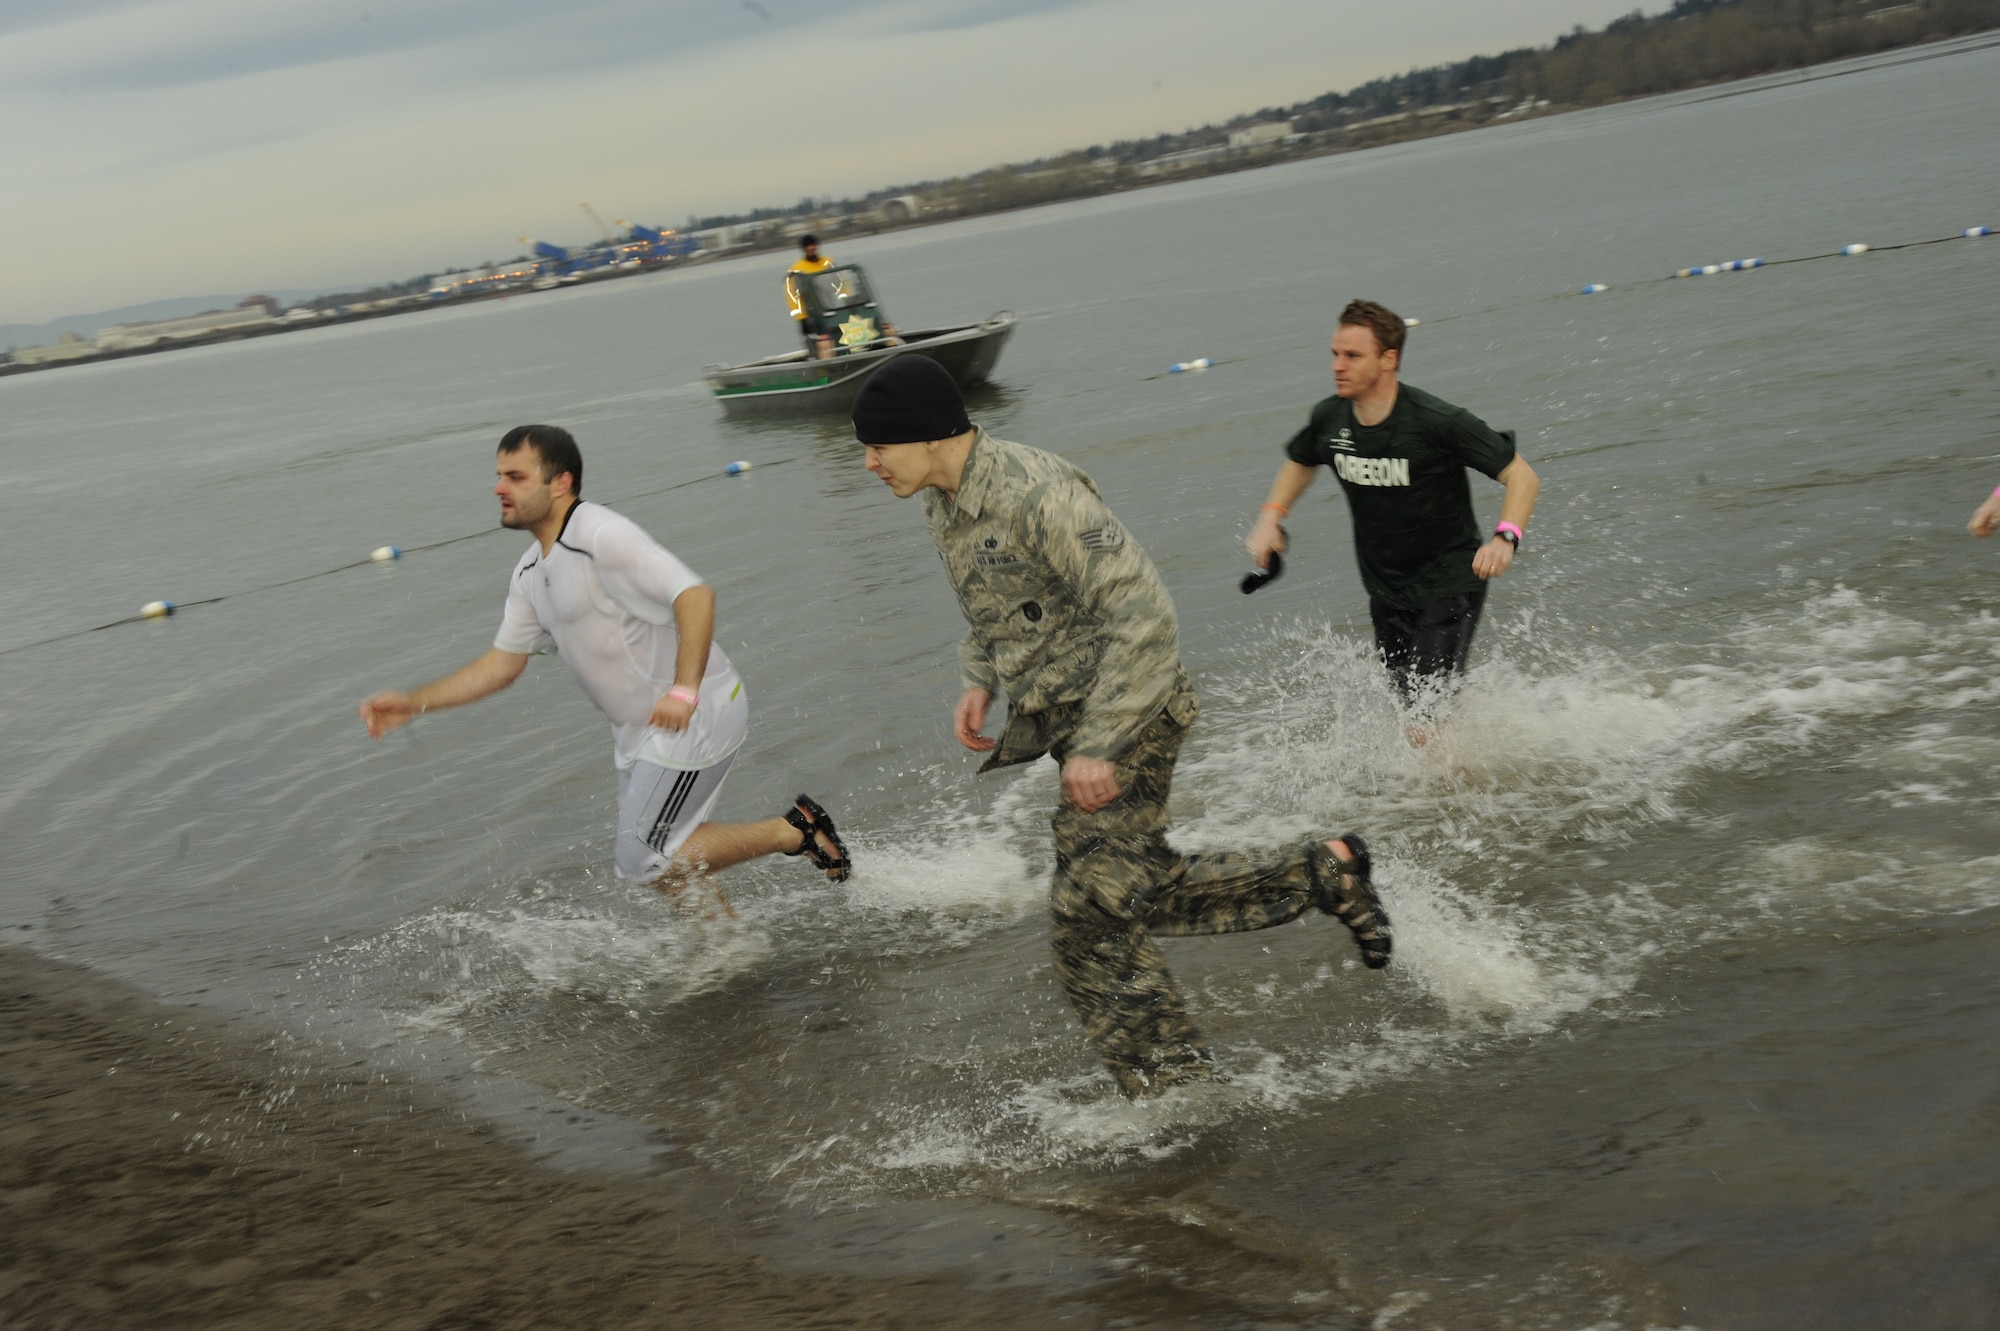 Oregon Air National Guard Staff Sgt. Jarrod Johnson, a member of the 142nd Fighter Wing in Portland, Ore., runs from the Columbia River on the morning of February 12, 2011 during the Super Polar Plunge. The 21 Super Plungers raised 65,000 dollars for Special Olympics of Oregon as they jumped in the water every hour for 24 straight hours. The 142nd Fighter Wing provided tents, heaters and other equipment for the event. (U.S. Air Force photograph by Tech. Sgt. John Hughel, 142nd Fighter Wing Public Affairs)